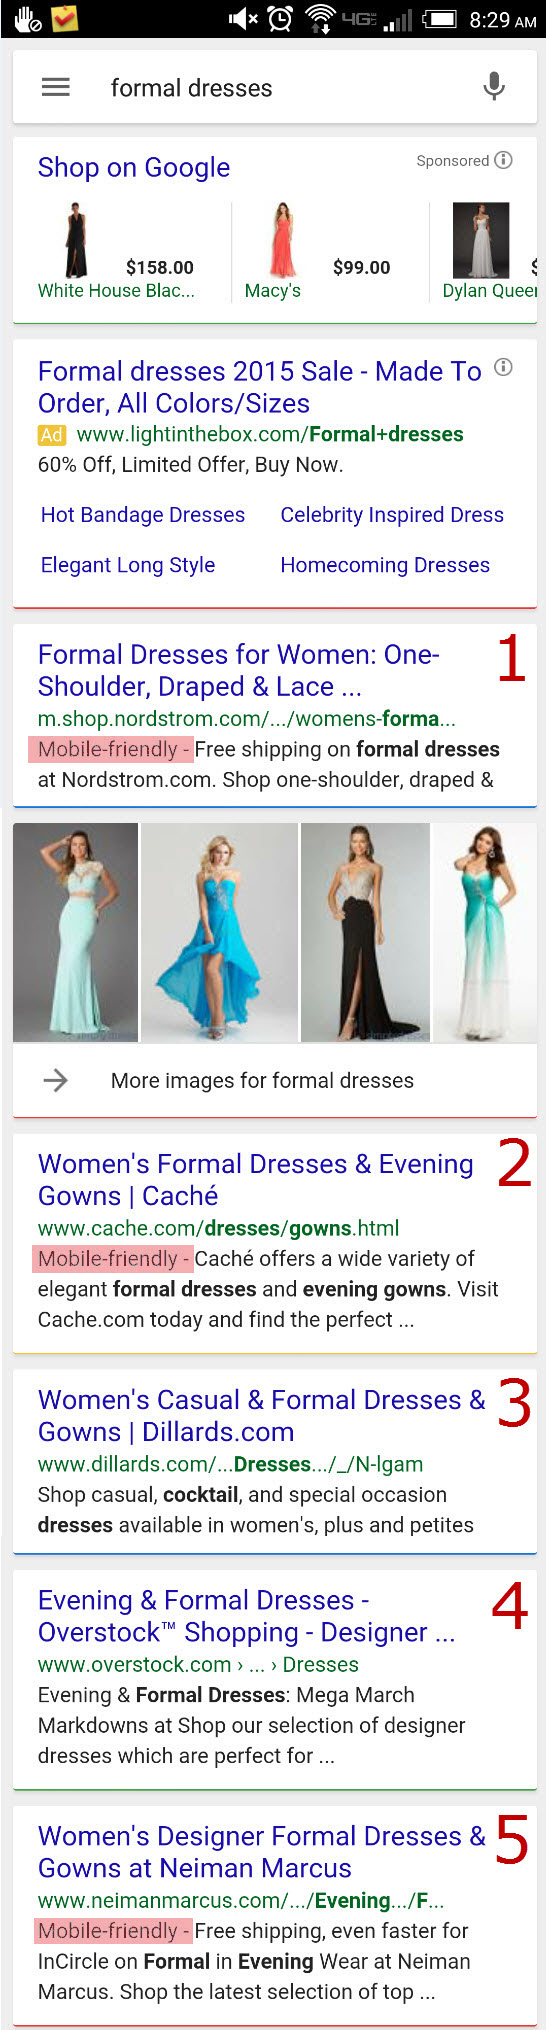 Sample mobile search results on Google for “formal dresses” on a smartphone.